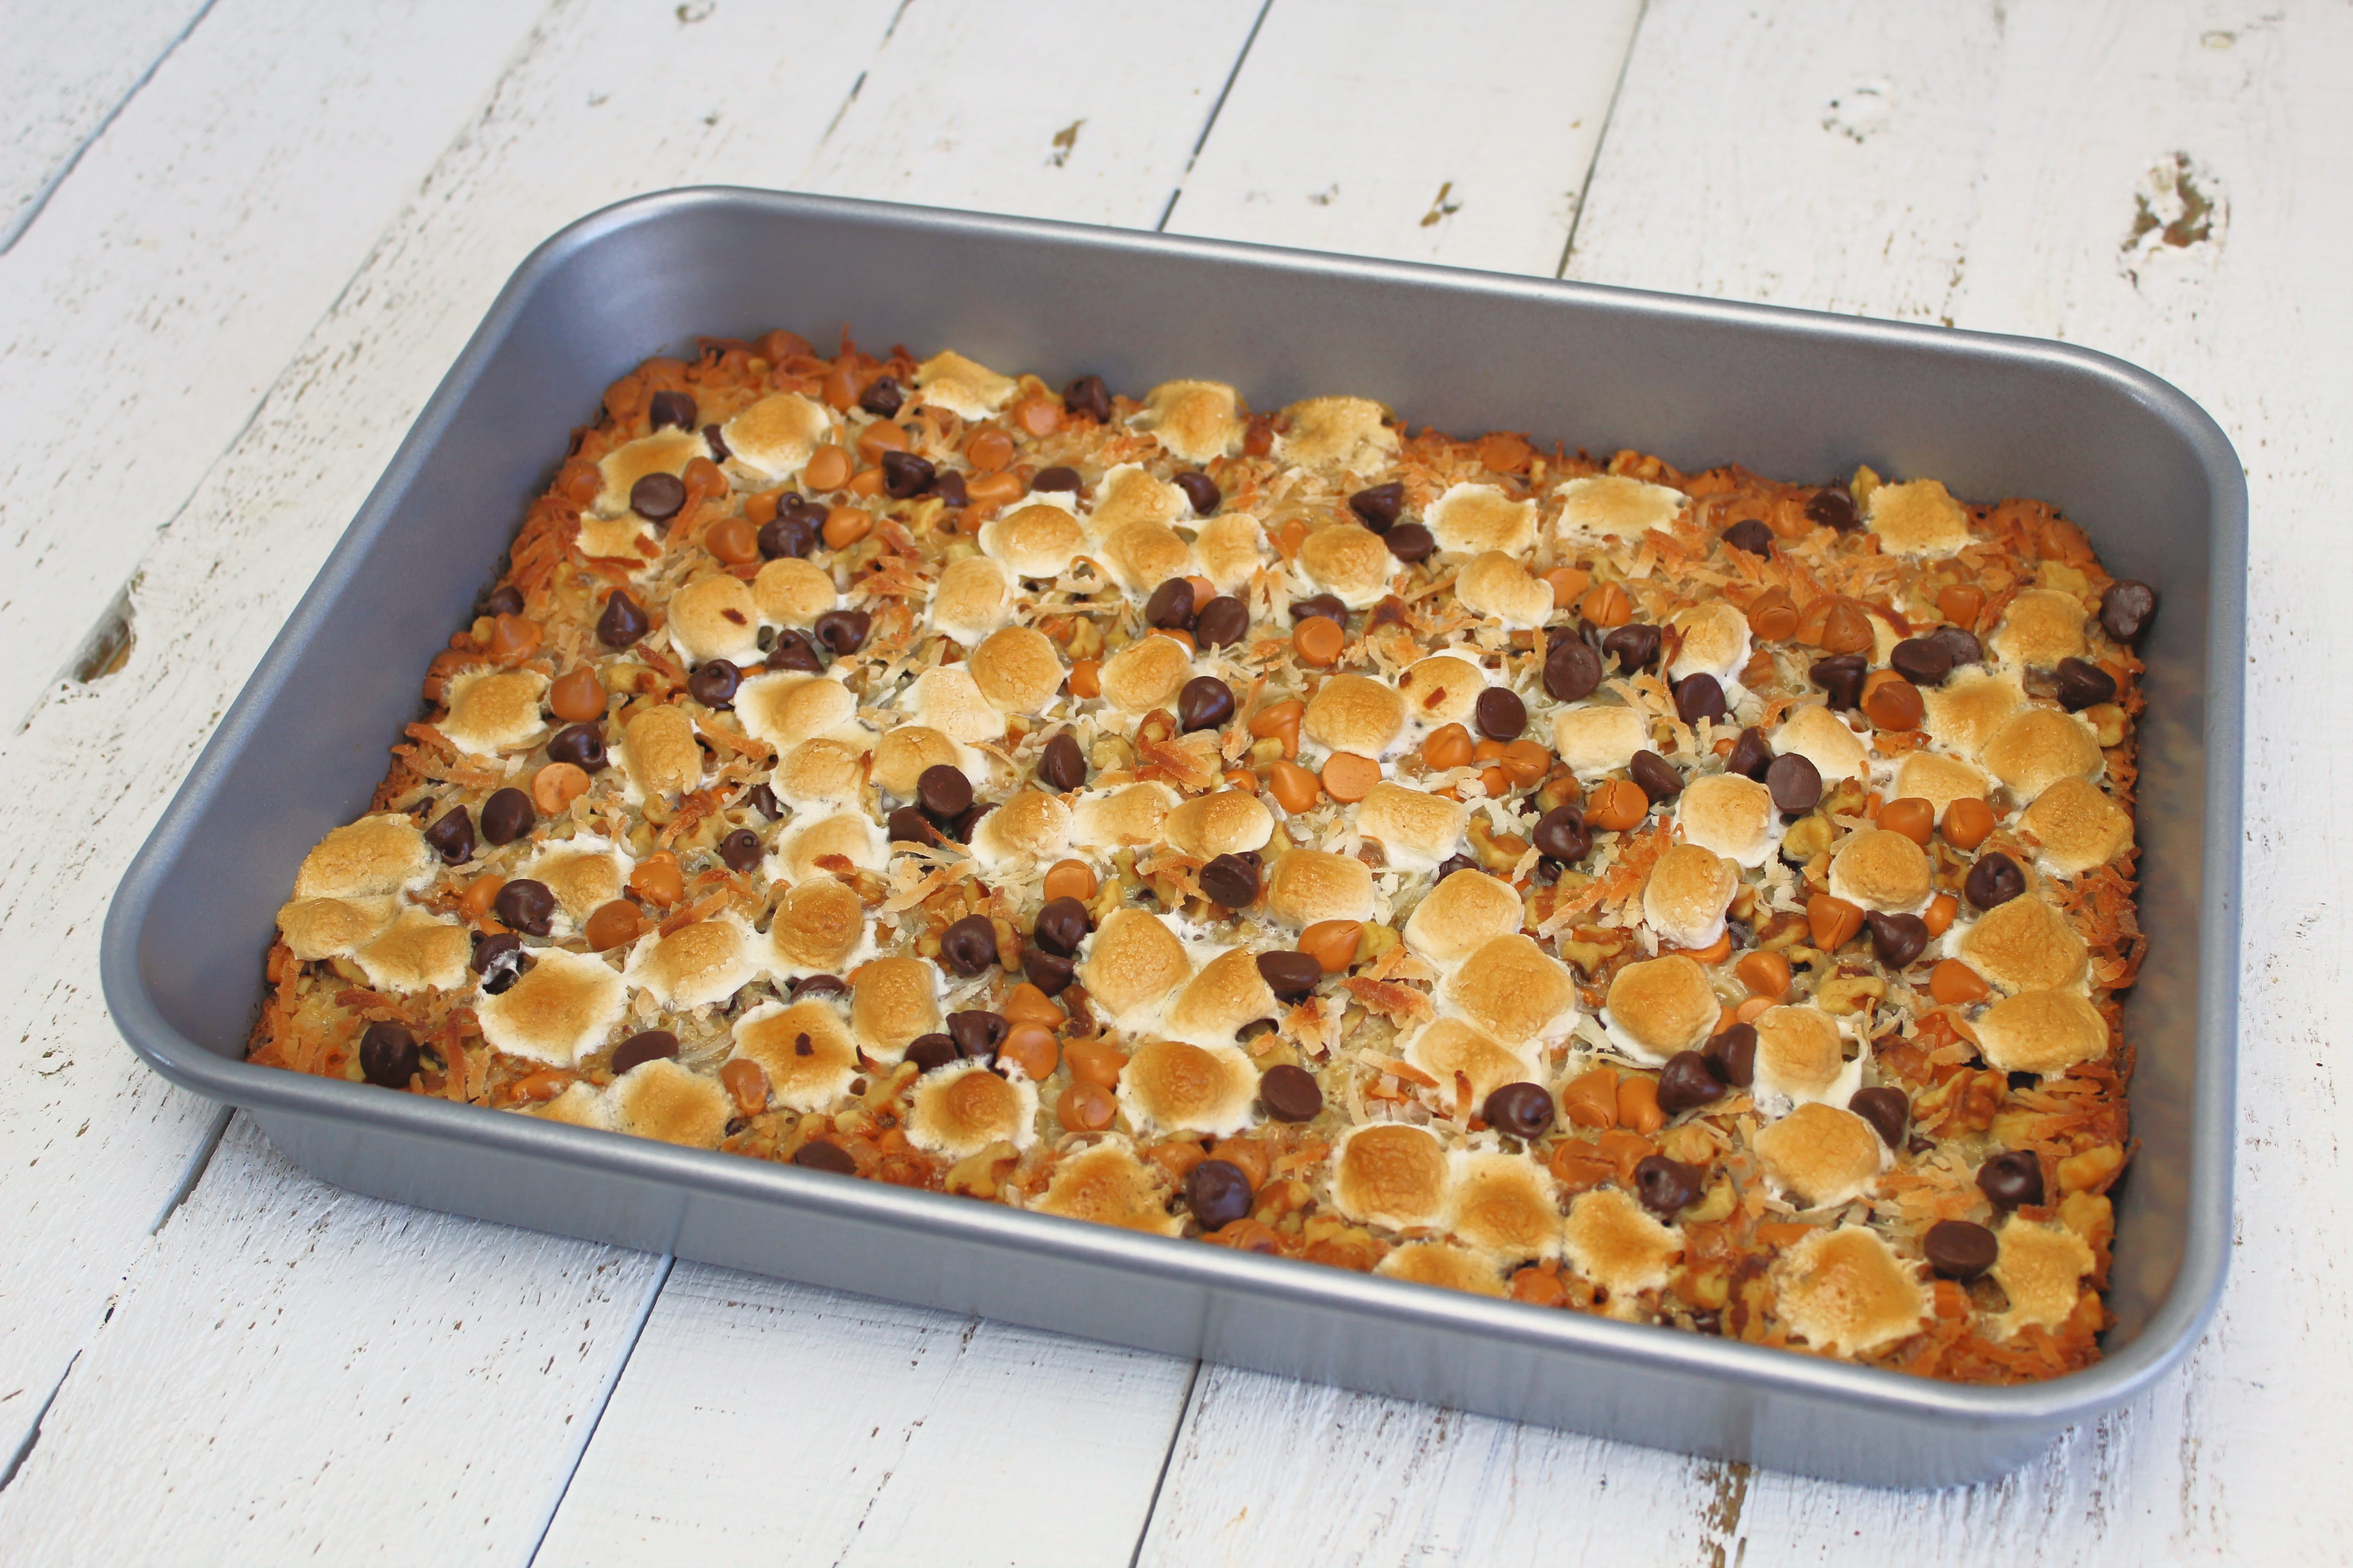 Bake until coconut and marshmallows are toasty and chocolate chips are melted.